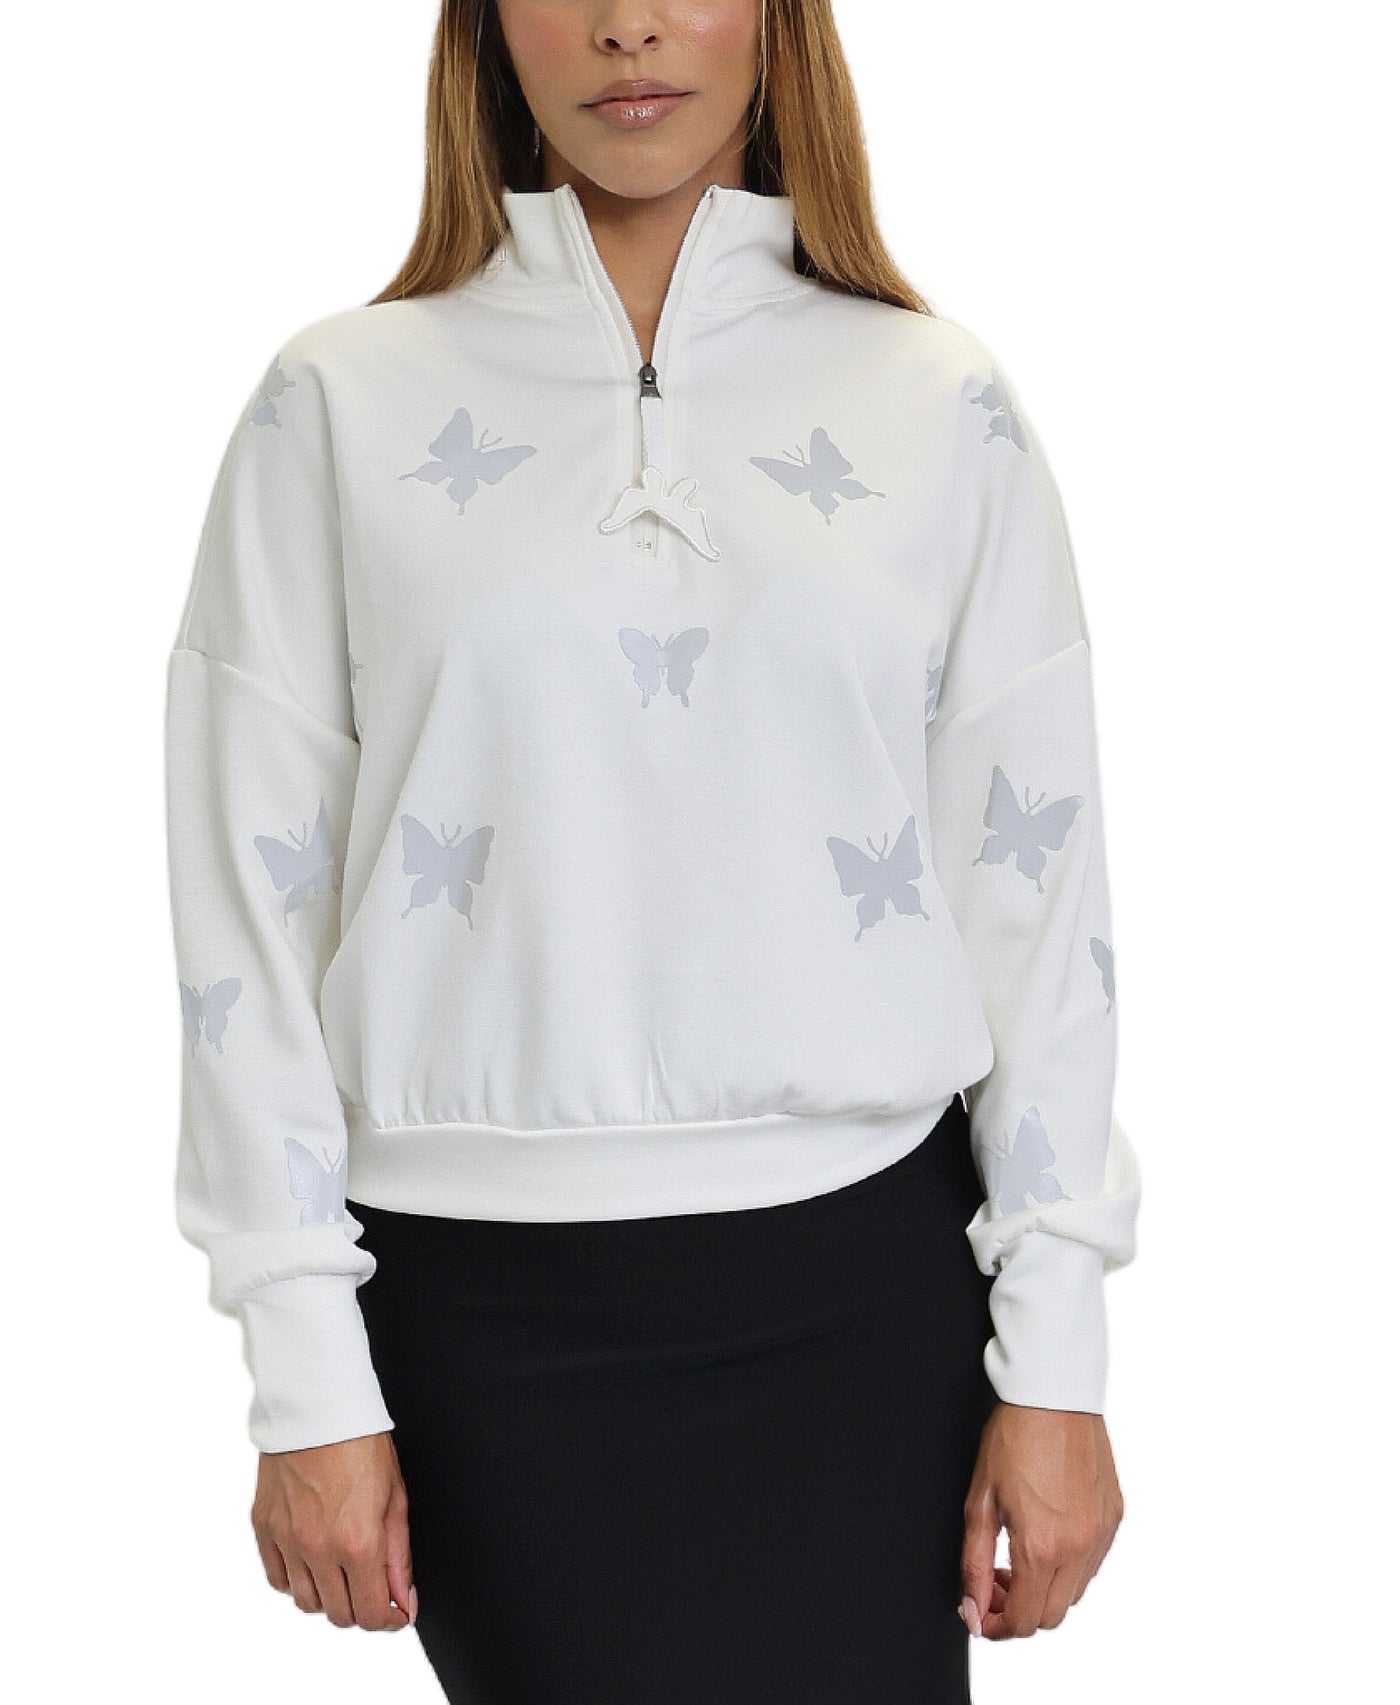 Butterfly Print Zip Up image 1